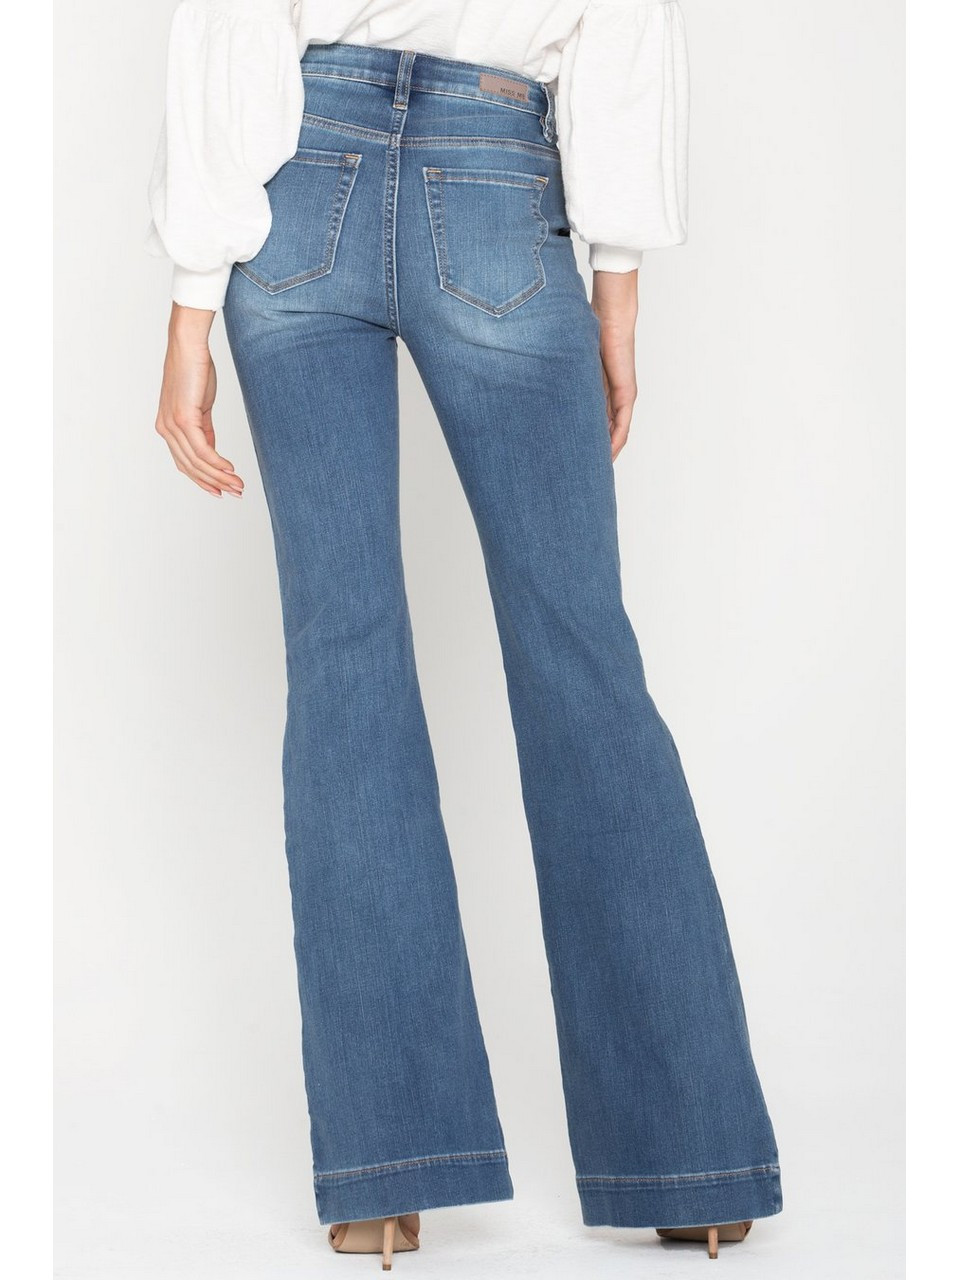 miss me bell bottom jeans